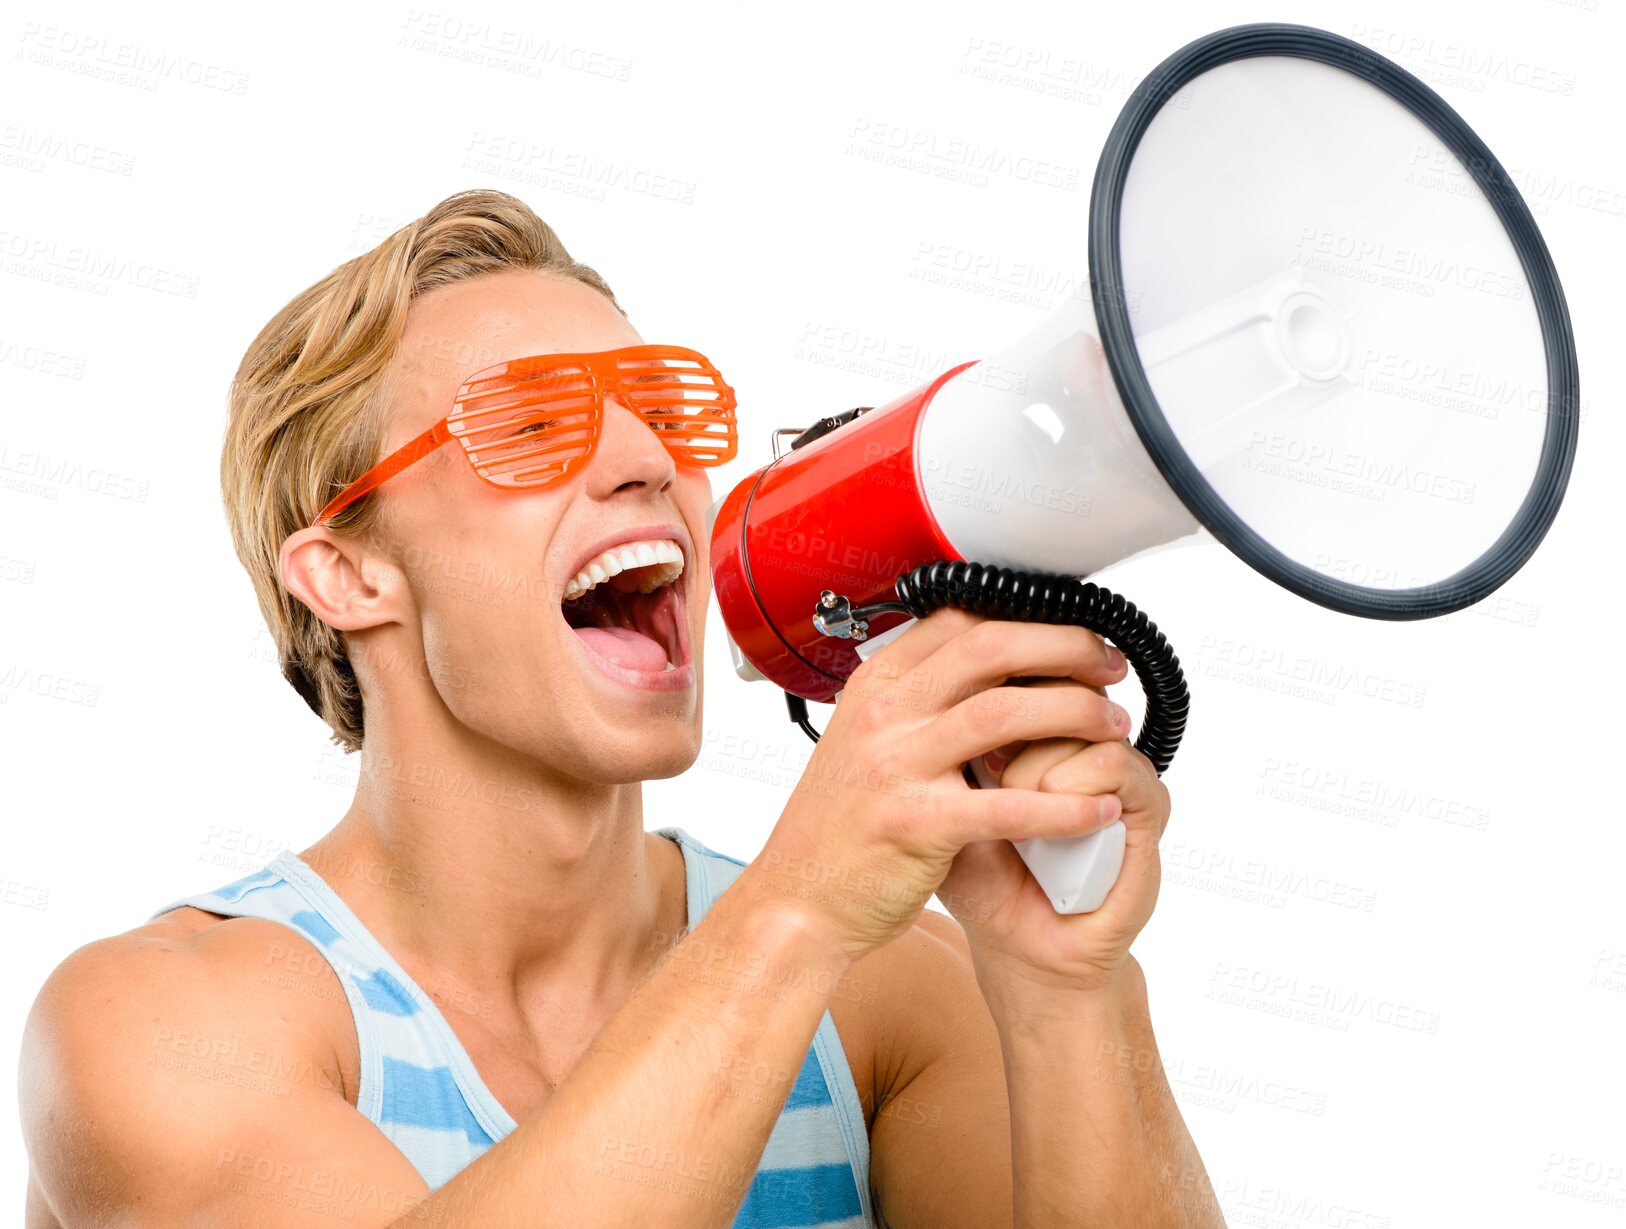 Buy stock photo Megaphone, summer and happy man with news, broadcast or announcement isolated on transparent png background. Excited person, model or speaker speaking, voice and shout for promotion, sale or discount